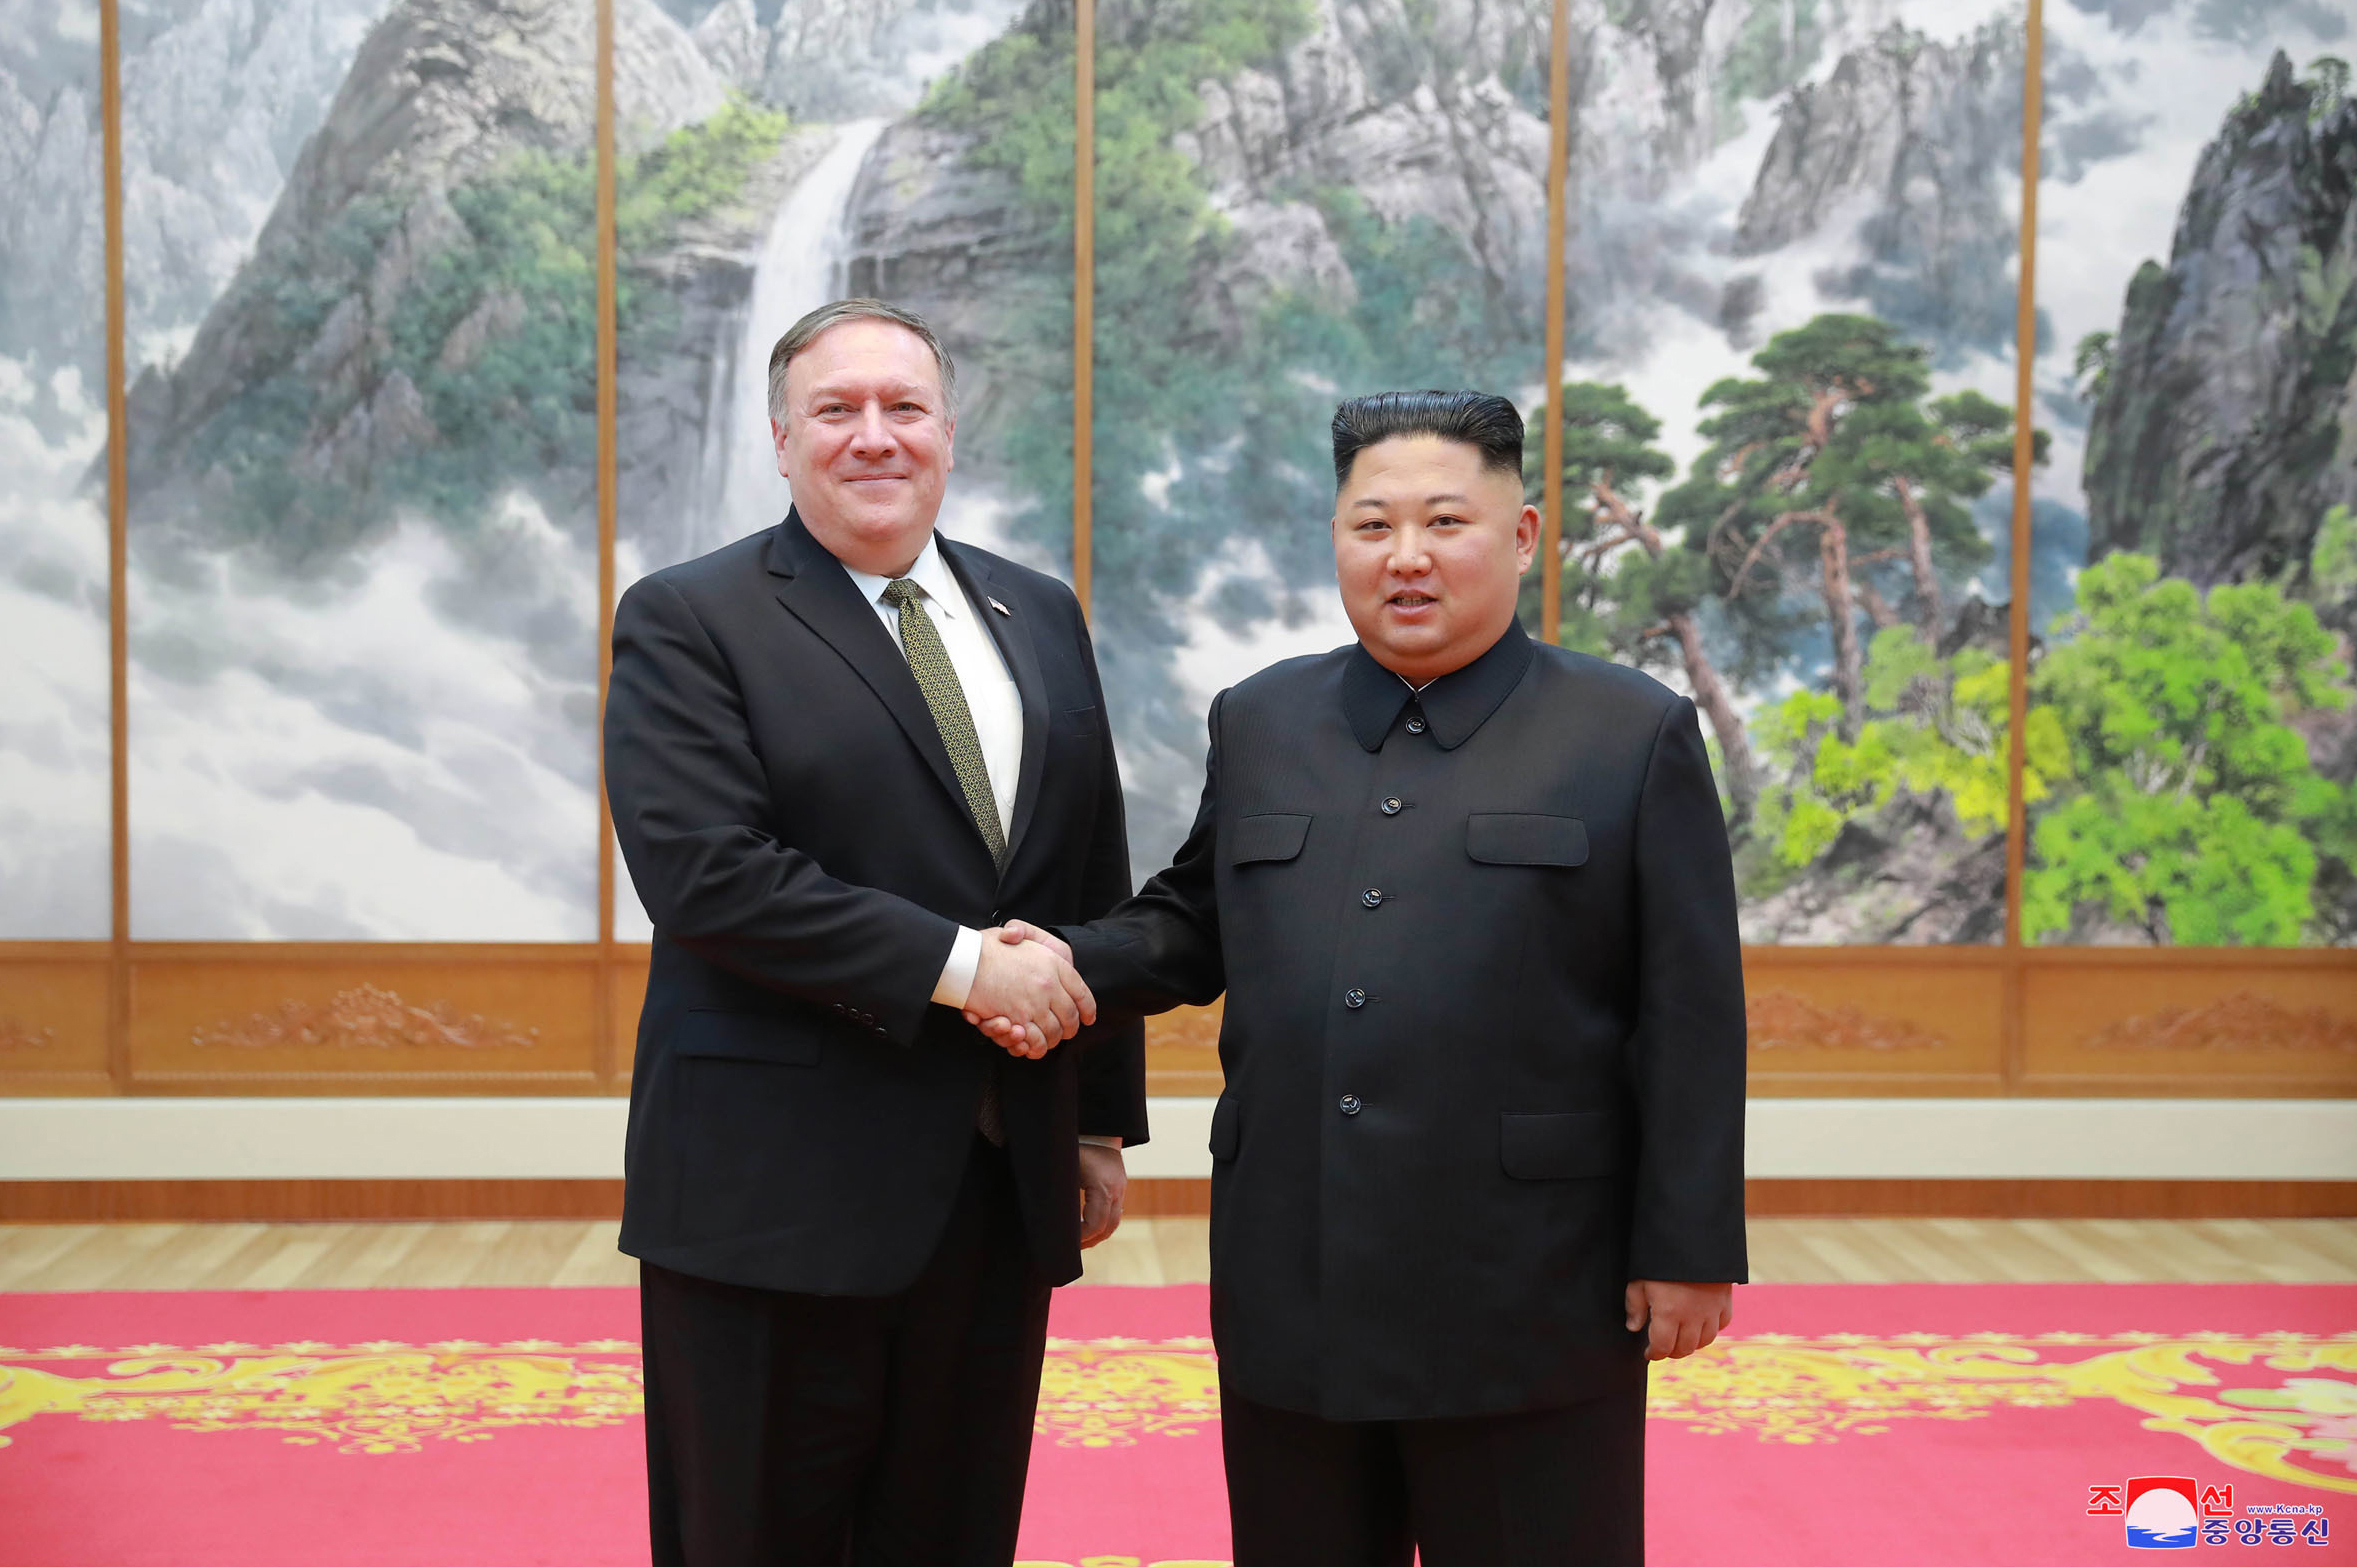 PHOTO: In this photo provided by the North Korean government, Secretary of State Mike Pompeo, left, shakes hands with North Korean leader Kim Jong Un as they pose for a photo in Pyongyang, North Korea, Oct. 7, 2018.